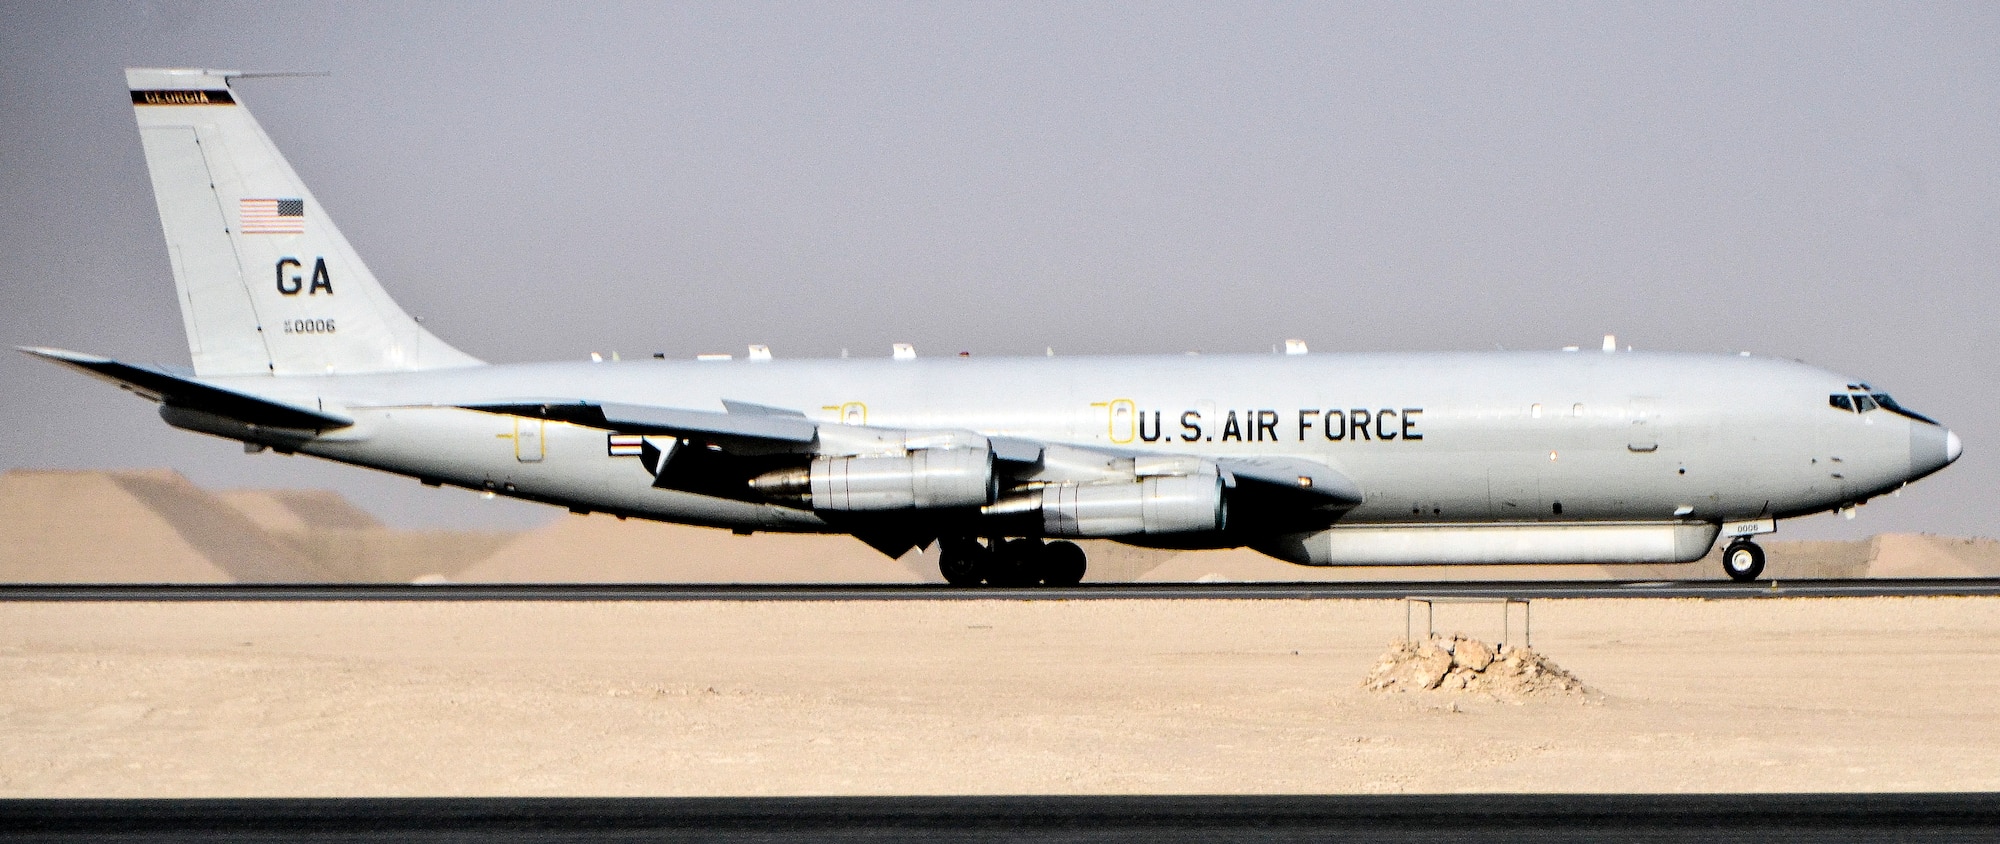 An E-8C Joint Surveillance Target Attack Radar System sits on a taxiway at Al Udeid Air Base, Qatar, May 1, 2014, after reaching a milestone of 100,000 flying hours to include more than 88,000 hours in the U.S. Central Command area of responsibility since 2001. The JSTARS mission is to provide ground commanders with intelligence, surveillance and reconnaissance air power to boost force protection, defensive operations, over-watch and combat search and rescue missions throughout the AOR.  (U.S. Air Force photo/Senior Airman Jared Trimarchi)